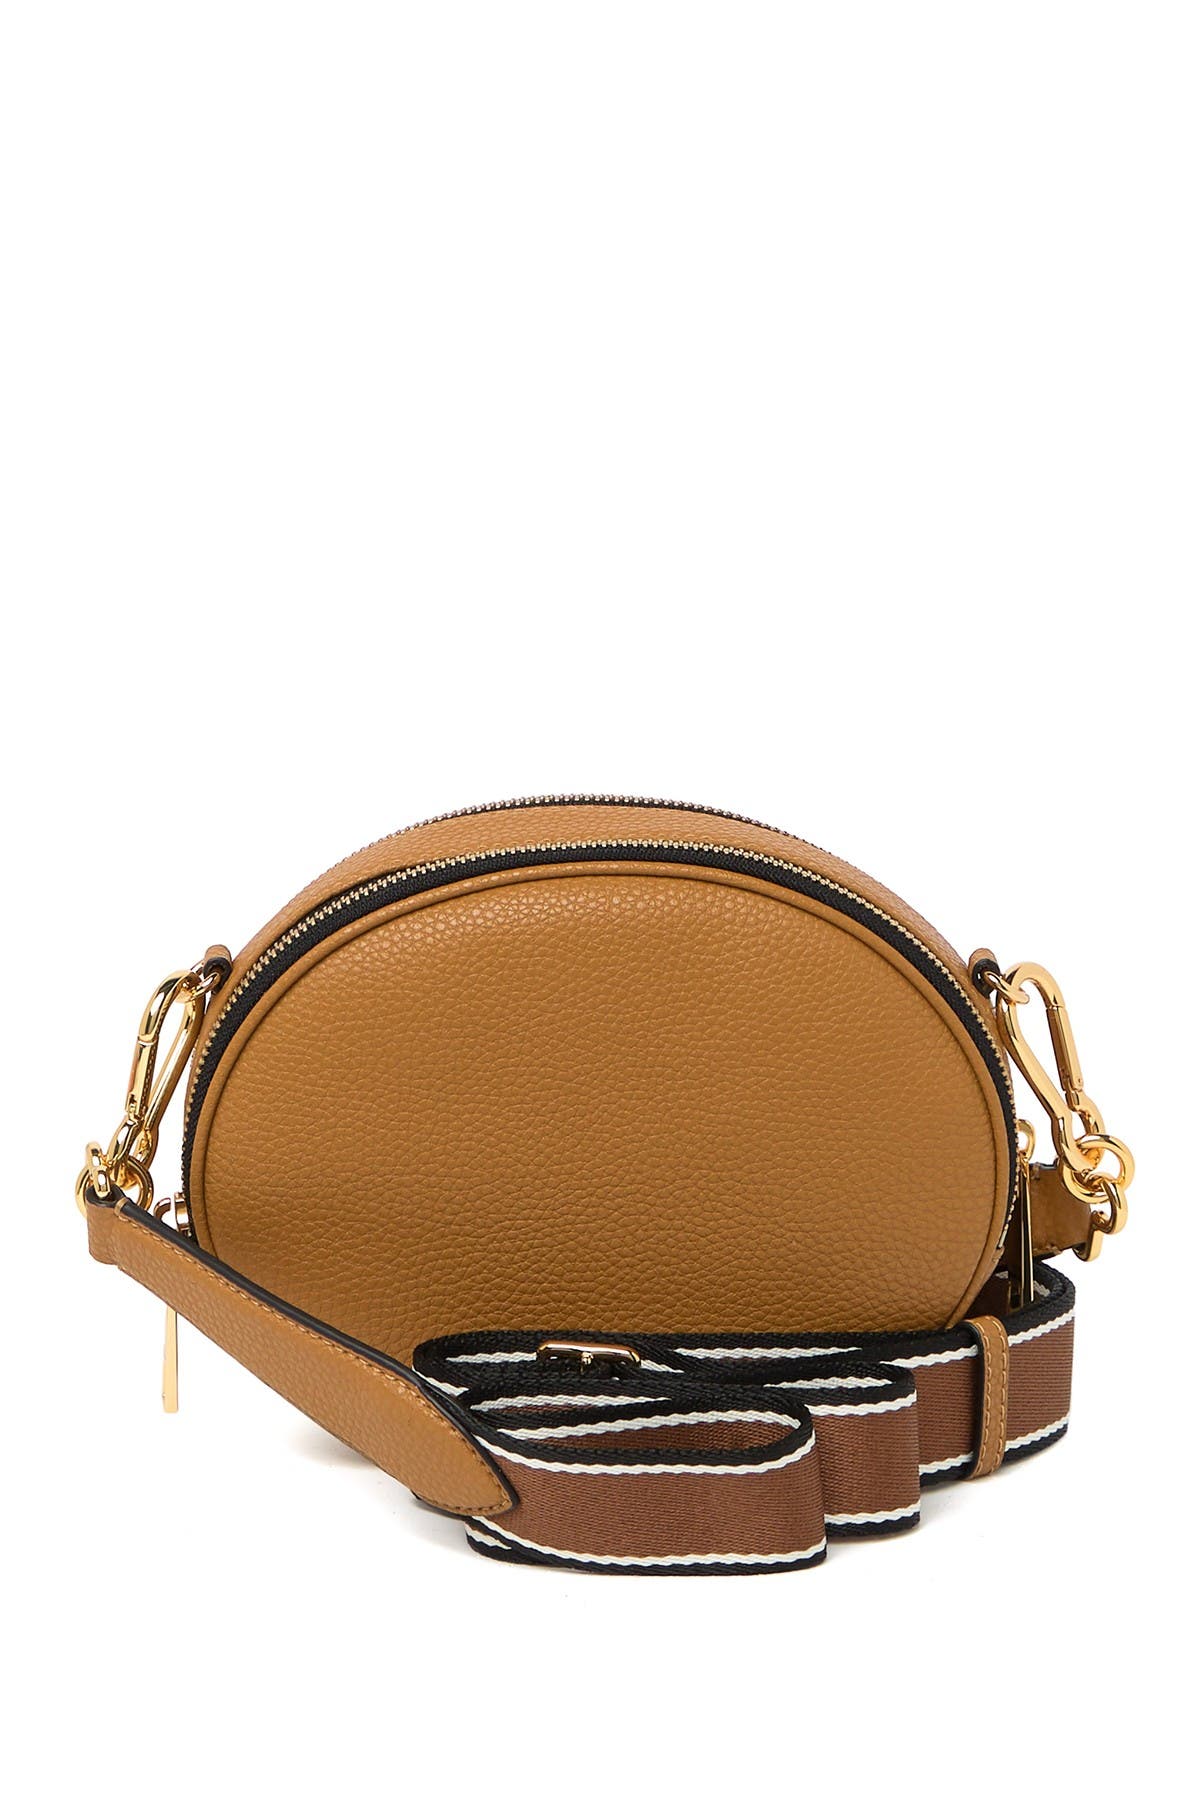 Marc Jacobs The Rewind Crossbody In Brown Butter